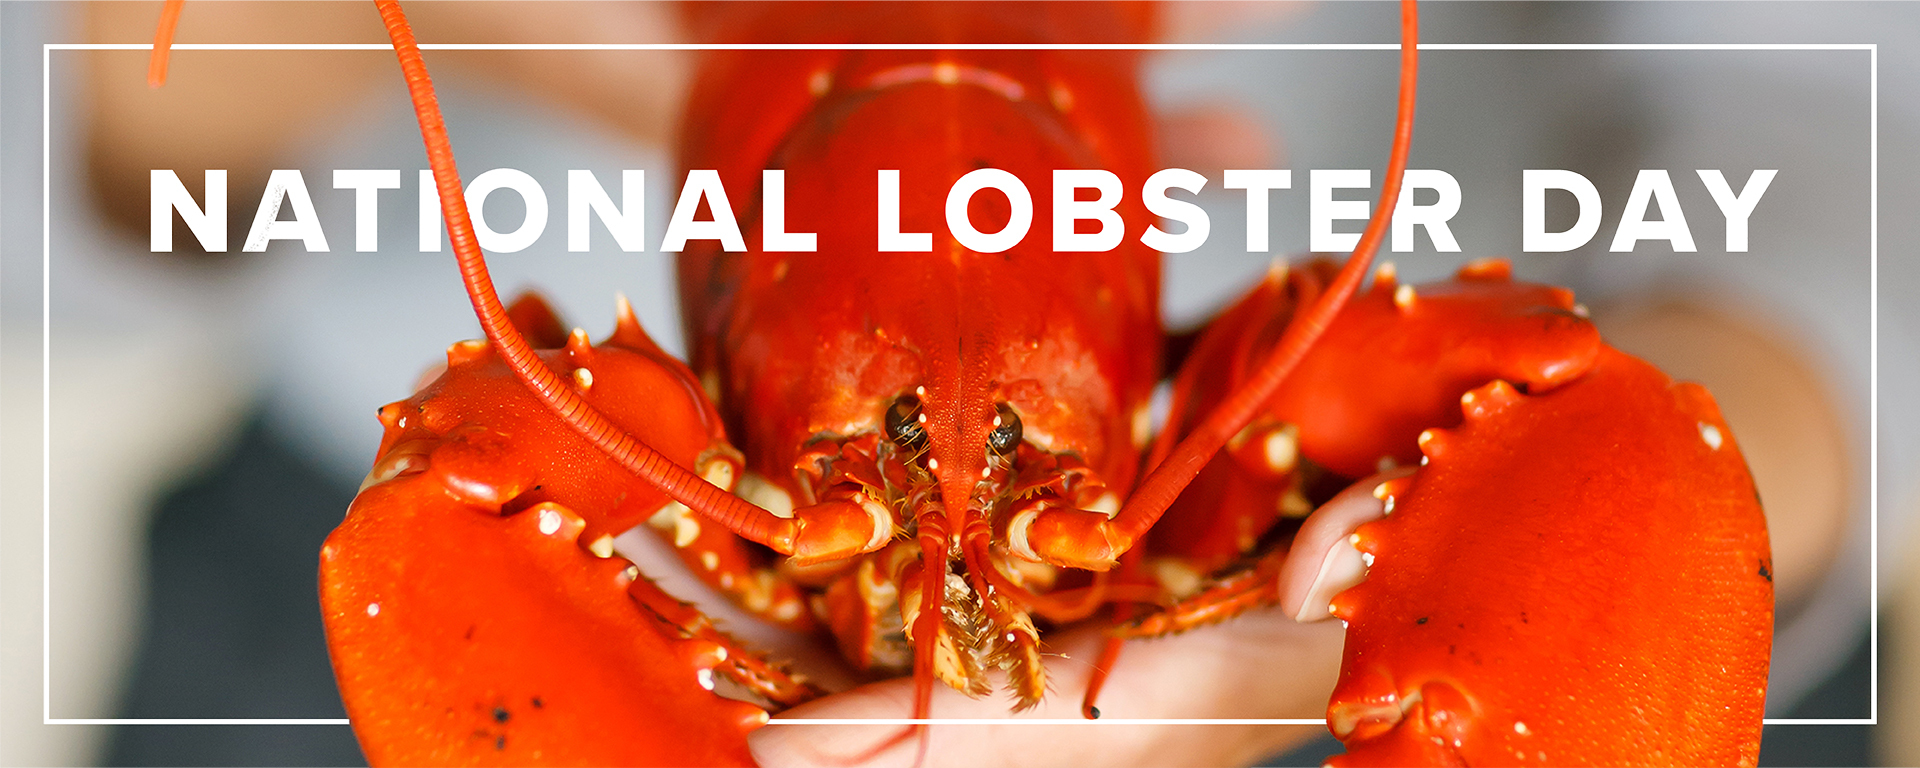 15-facts-about-national-lobster-day